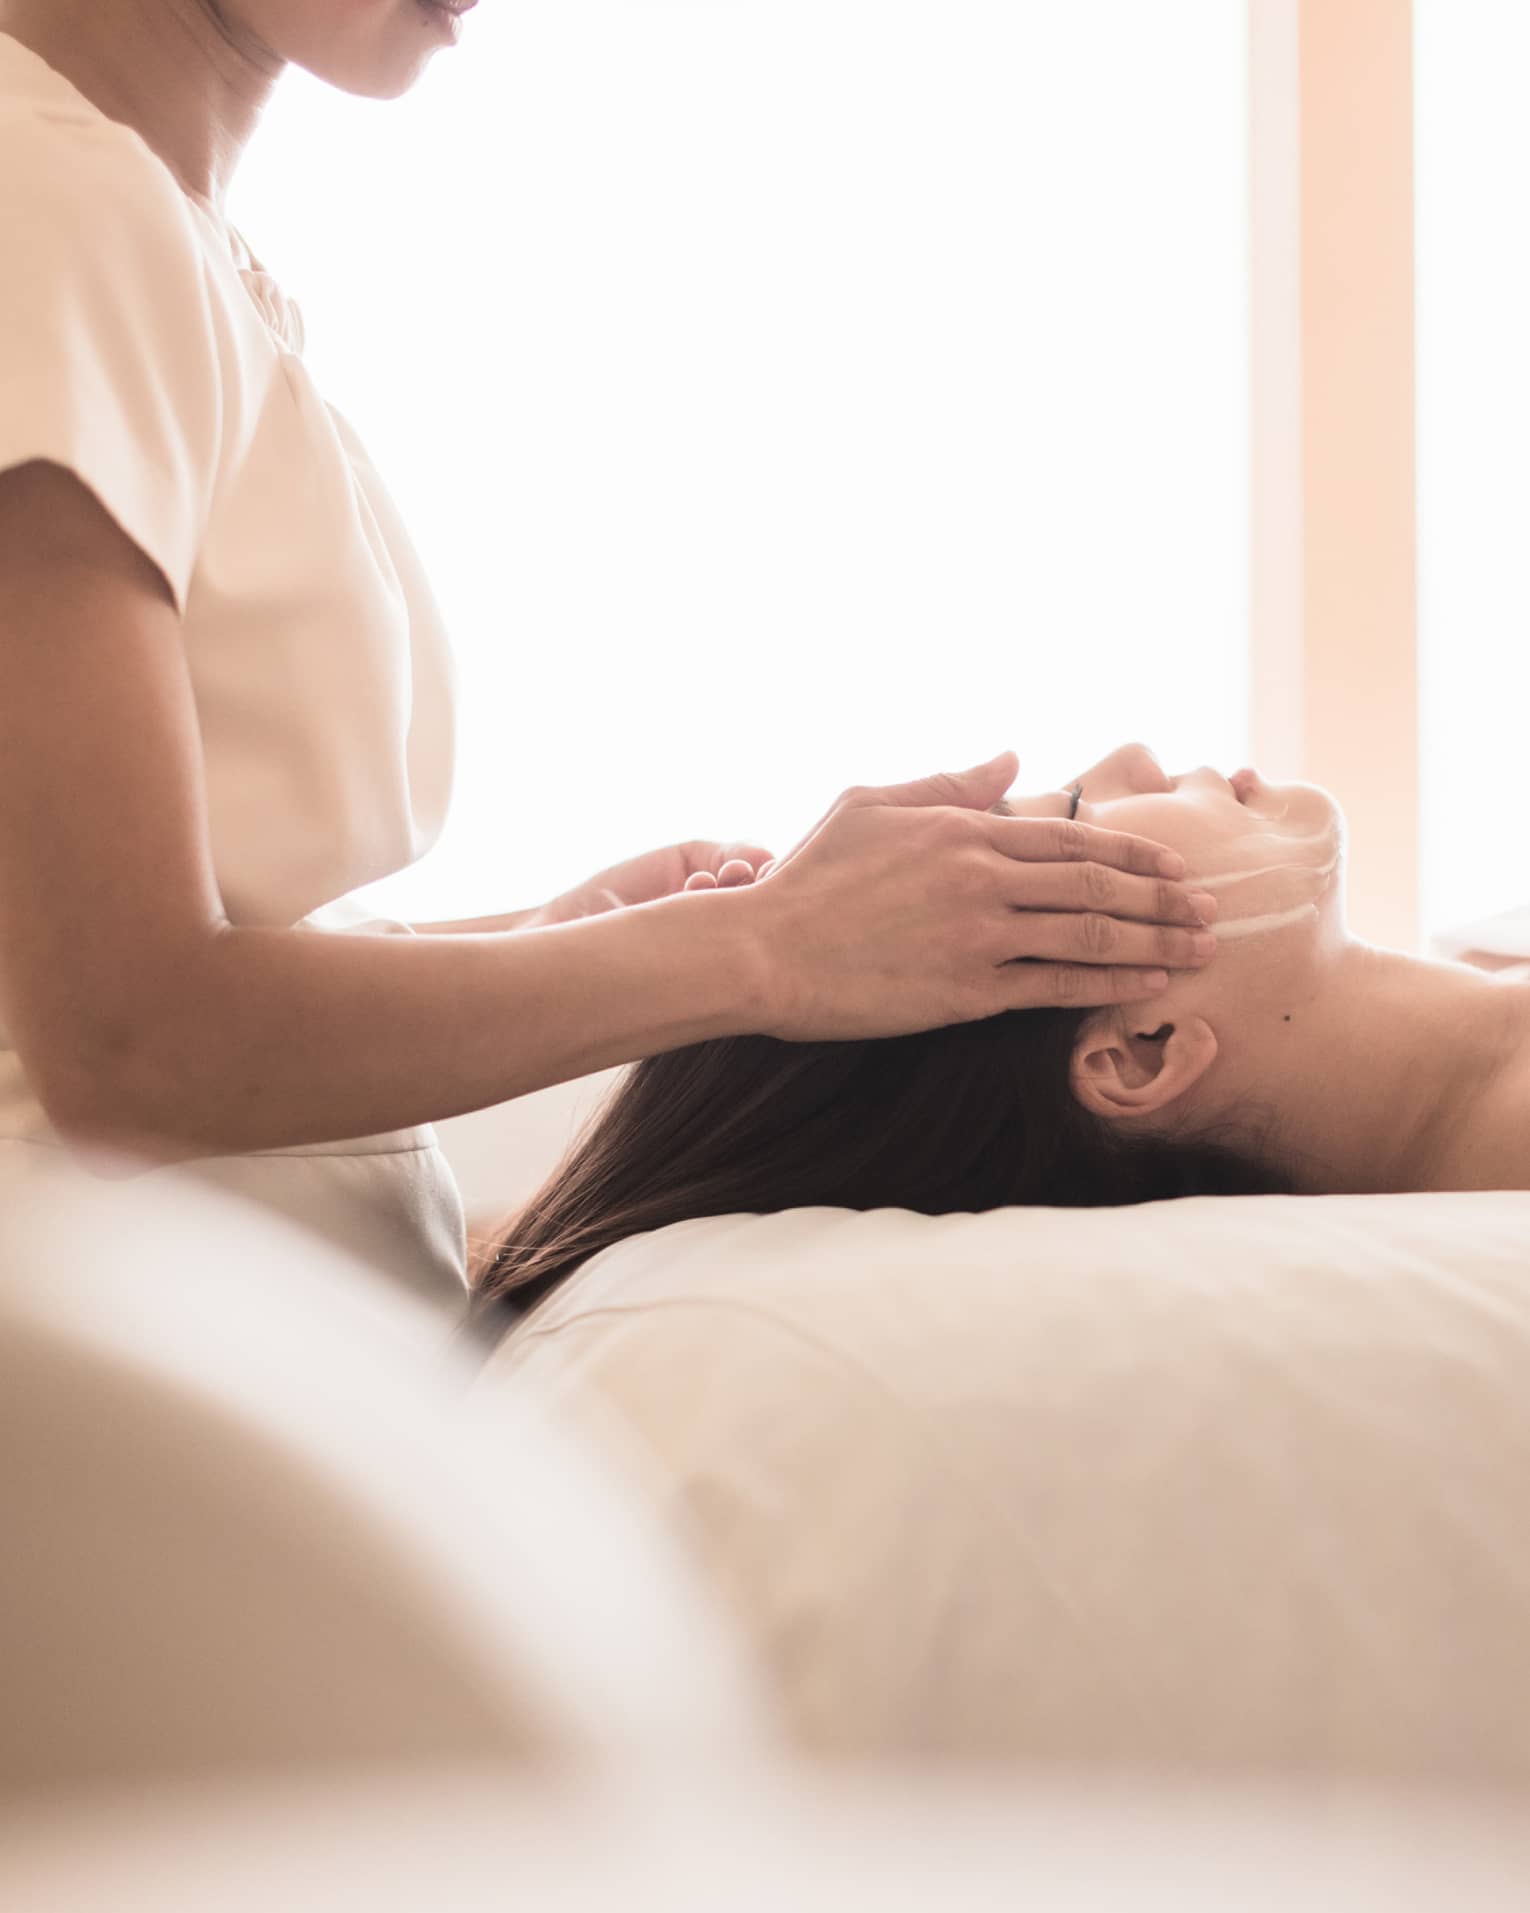 Spa staff massages woman's forehead, temples as she lies on massage table